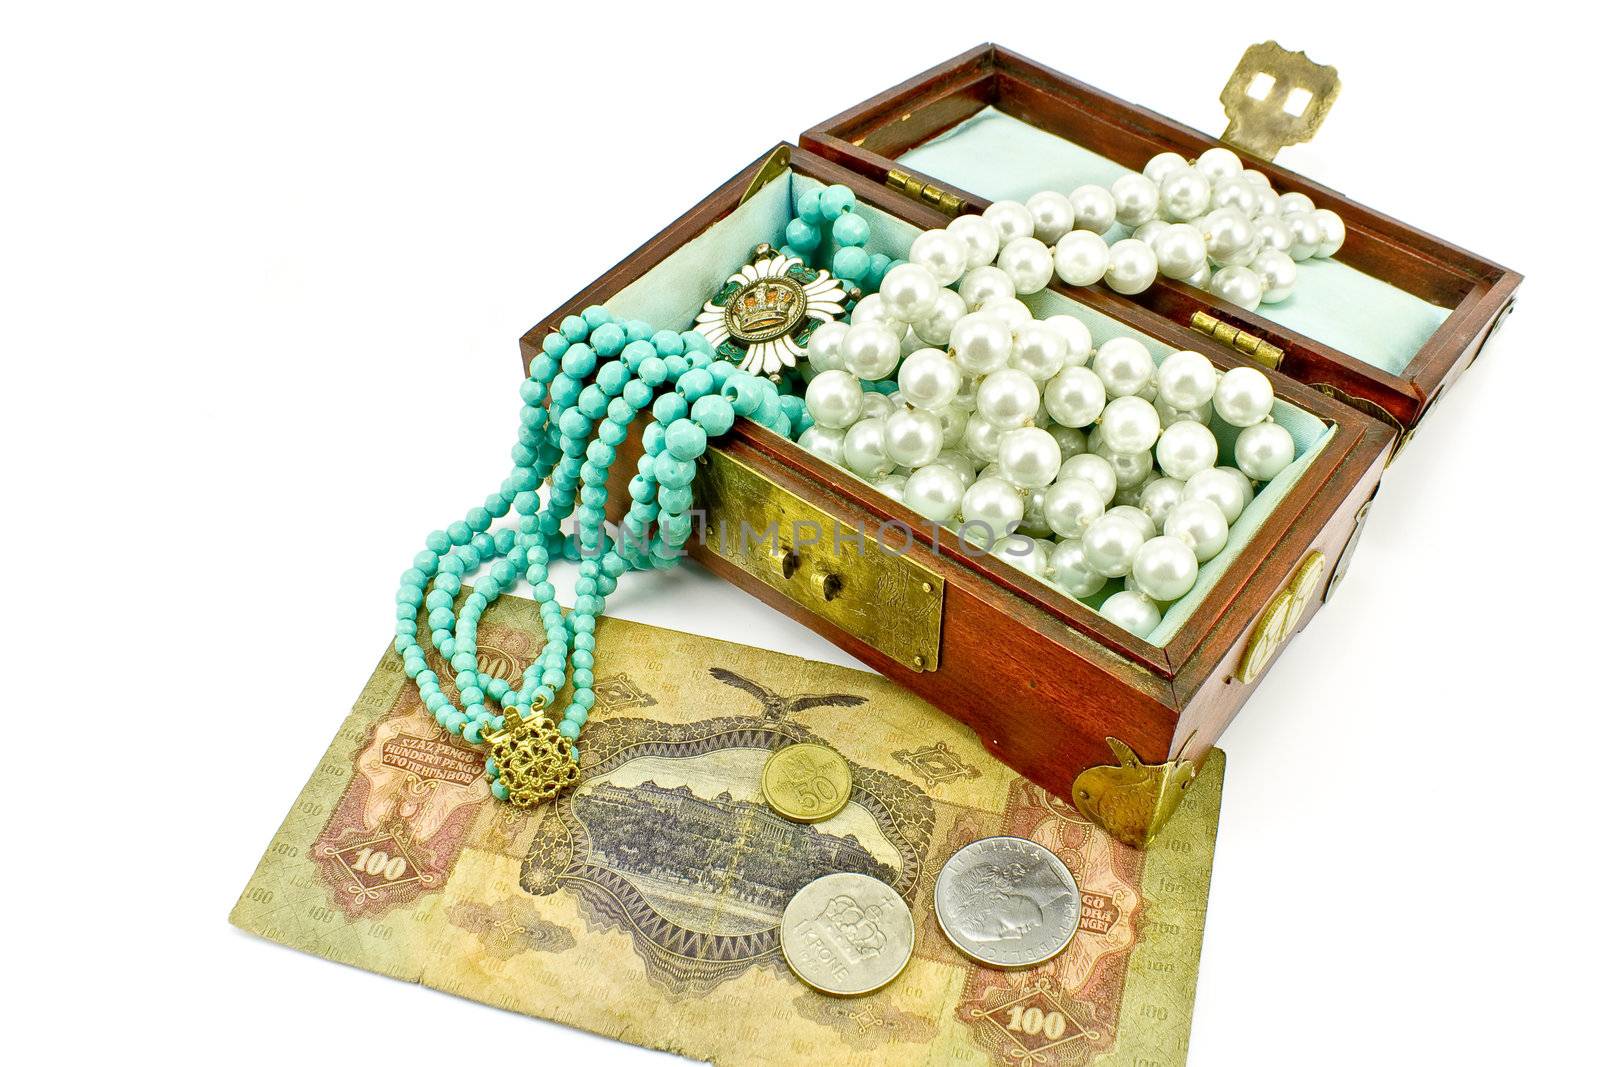 Wooden treasure chest with jewelry and money by gavran333